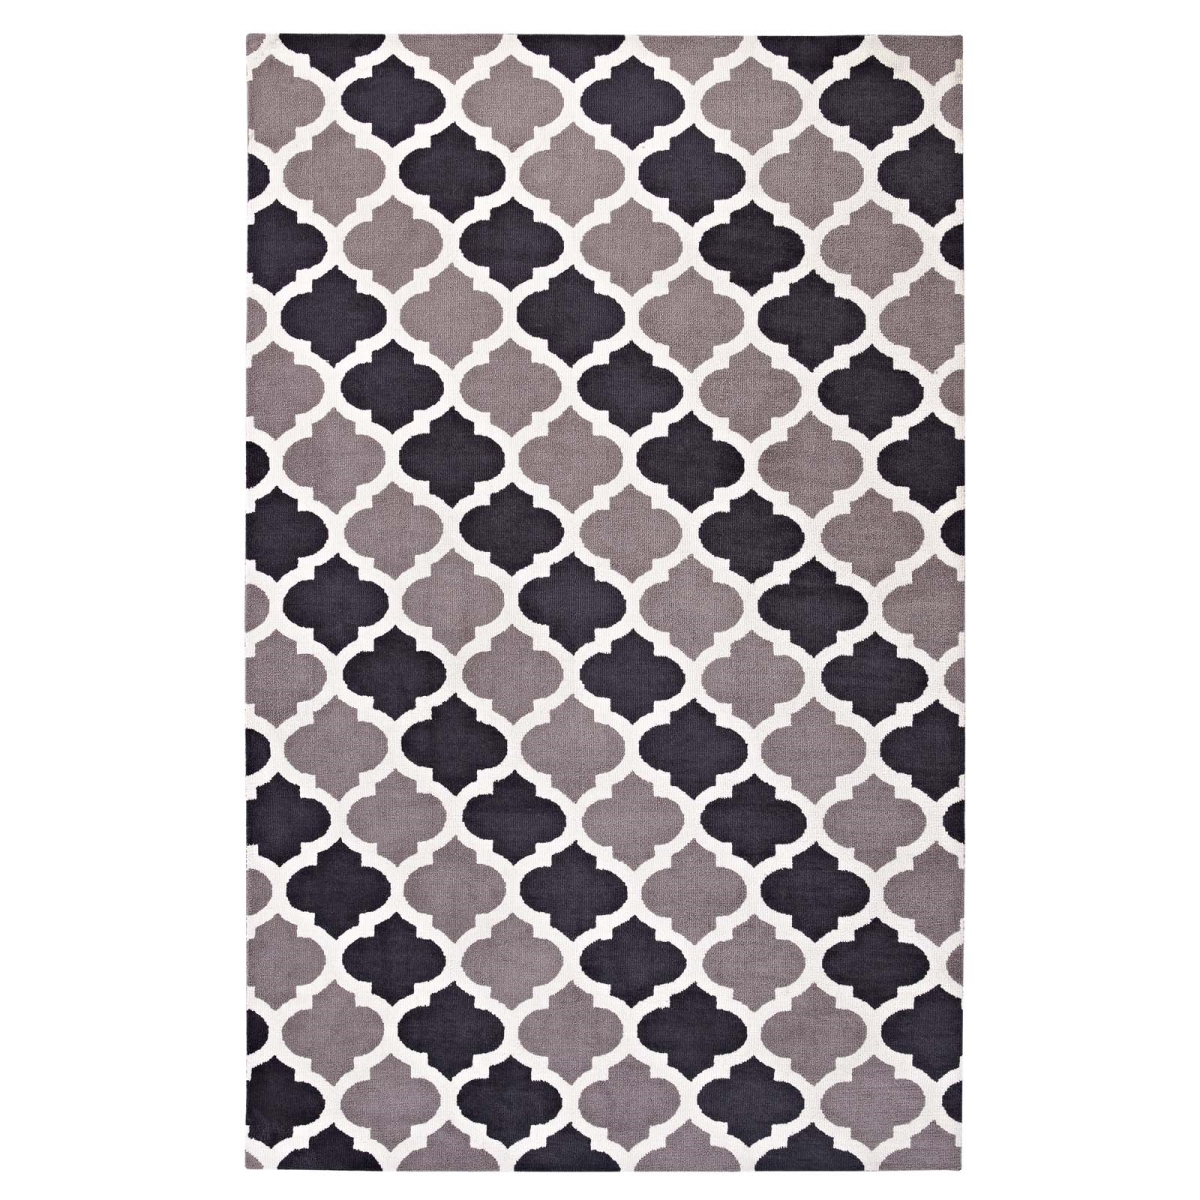 R-1001b-58 5 X 8 Ft. Lida Moroccan Trellis Polyester Area Rug - Charcoal & Black, 0.5 X 60 X 96 In.